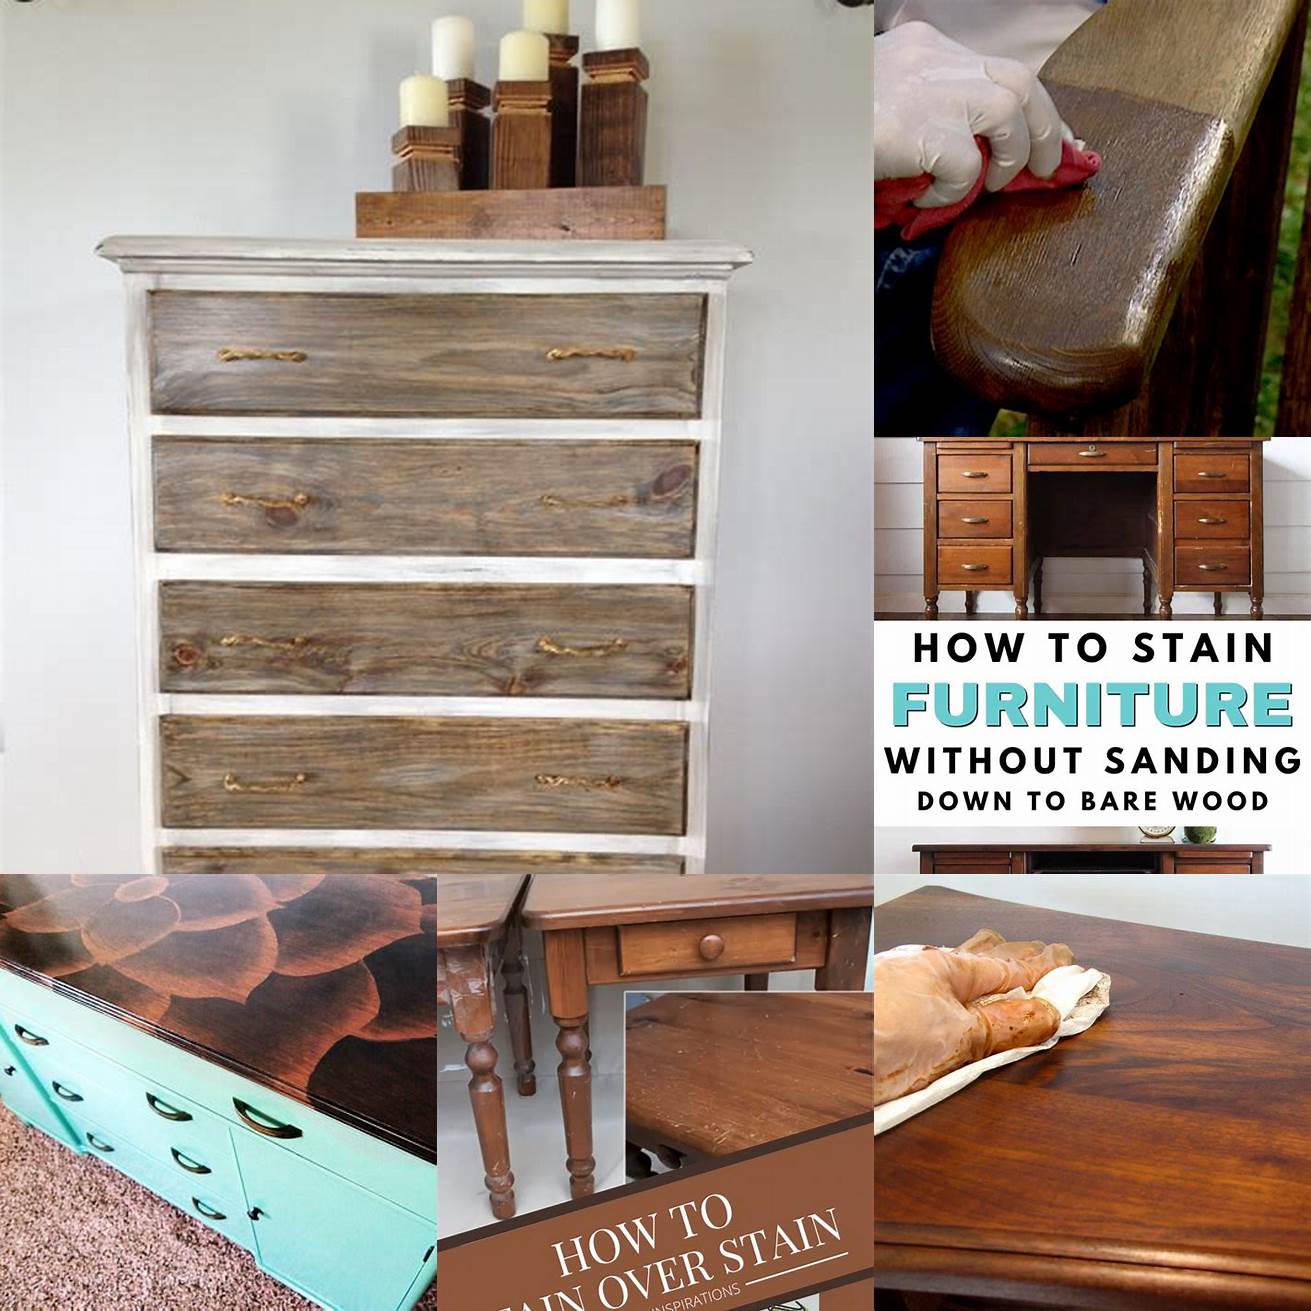 Staining tips and tricks